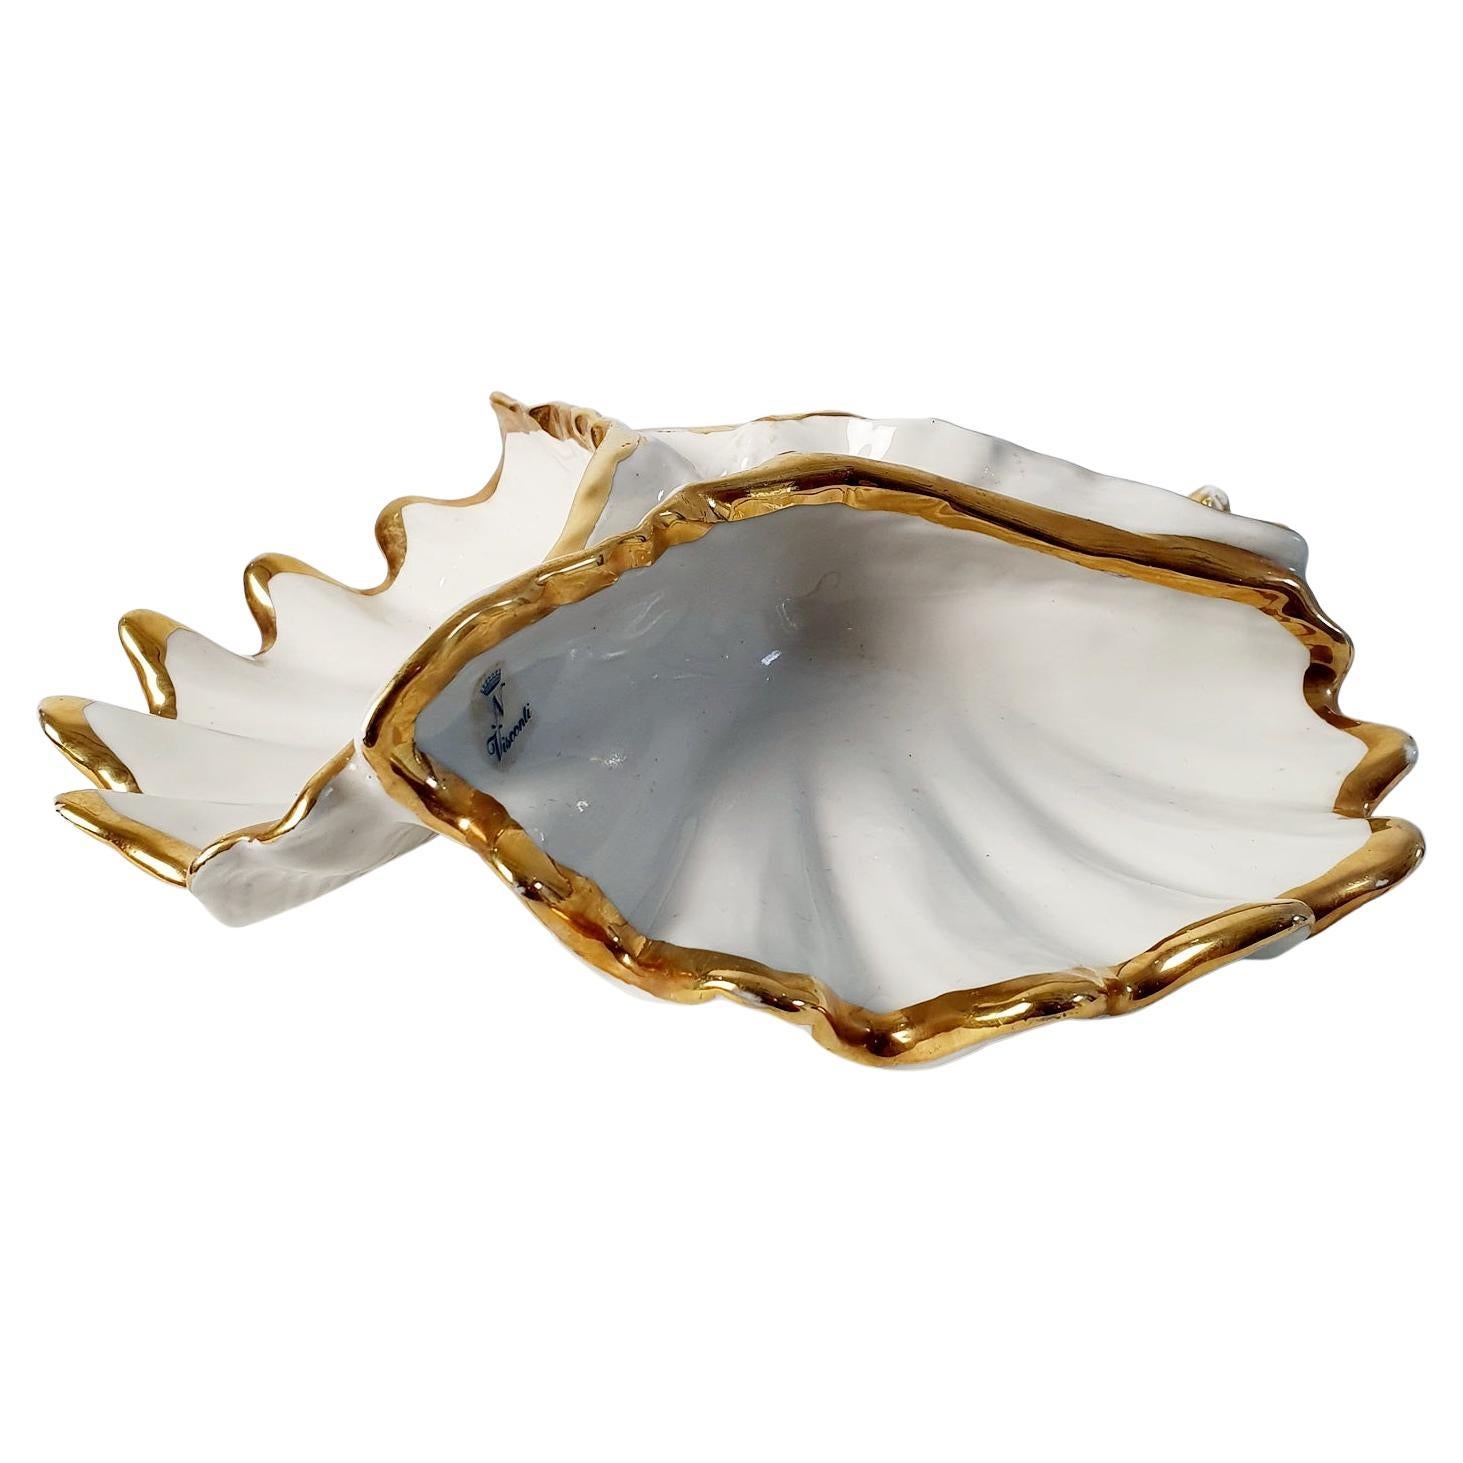 A shell bowl by Capodimonte in ivory white porcelain divided in three sections with gold edges. Marked with sticker Visconti and the crowned N. Perfect for different snacks or jewelry.
Some wear to the gold but no chipping.